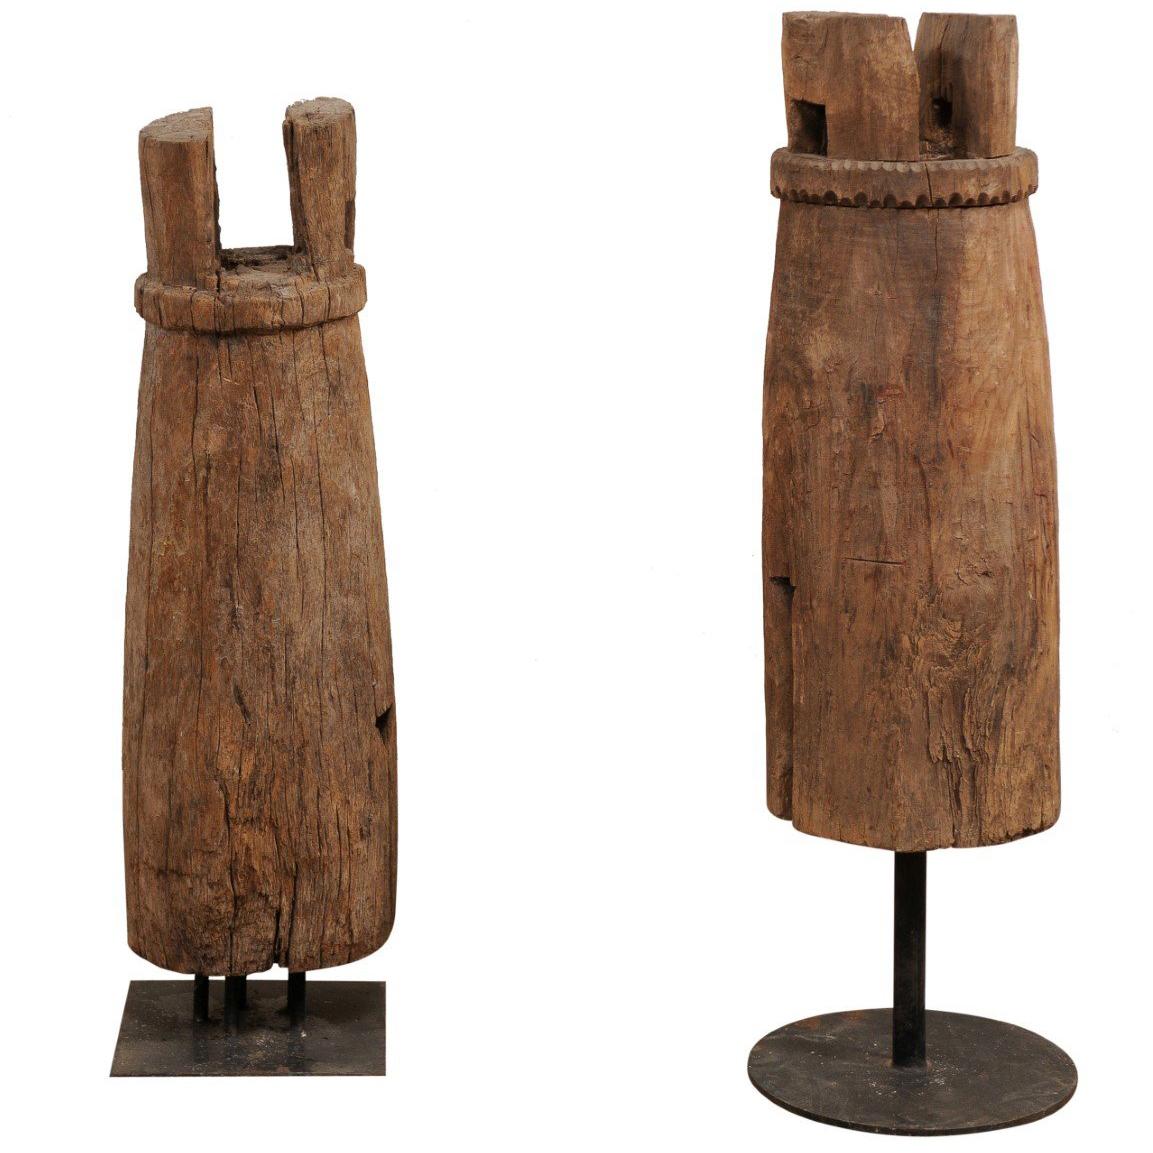 Pair of Hand-Carved Thai Wooden Temple Bells on Stands, Early 20th Century For Sale